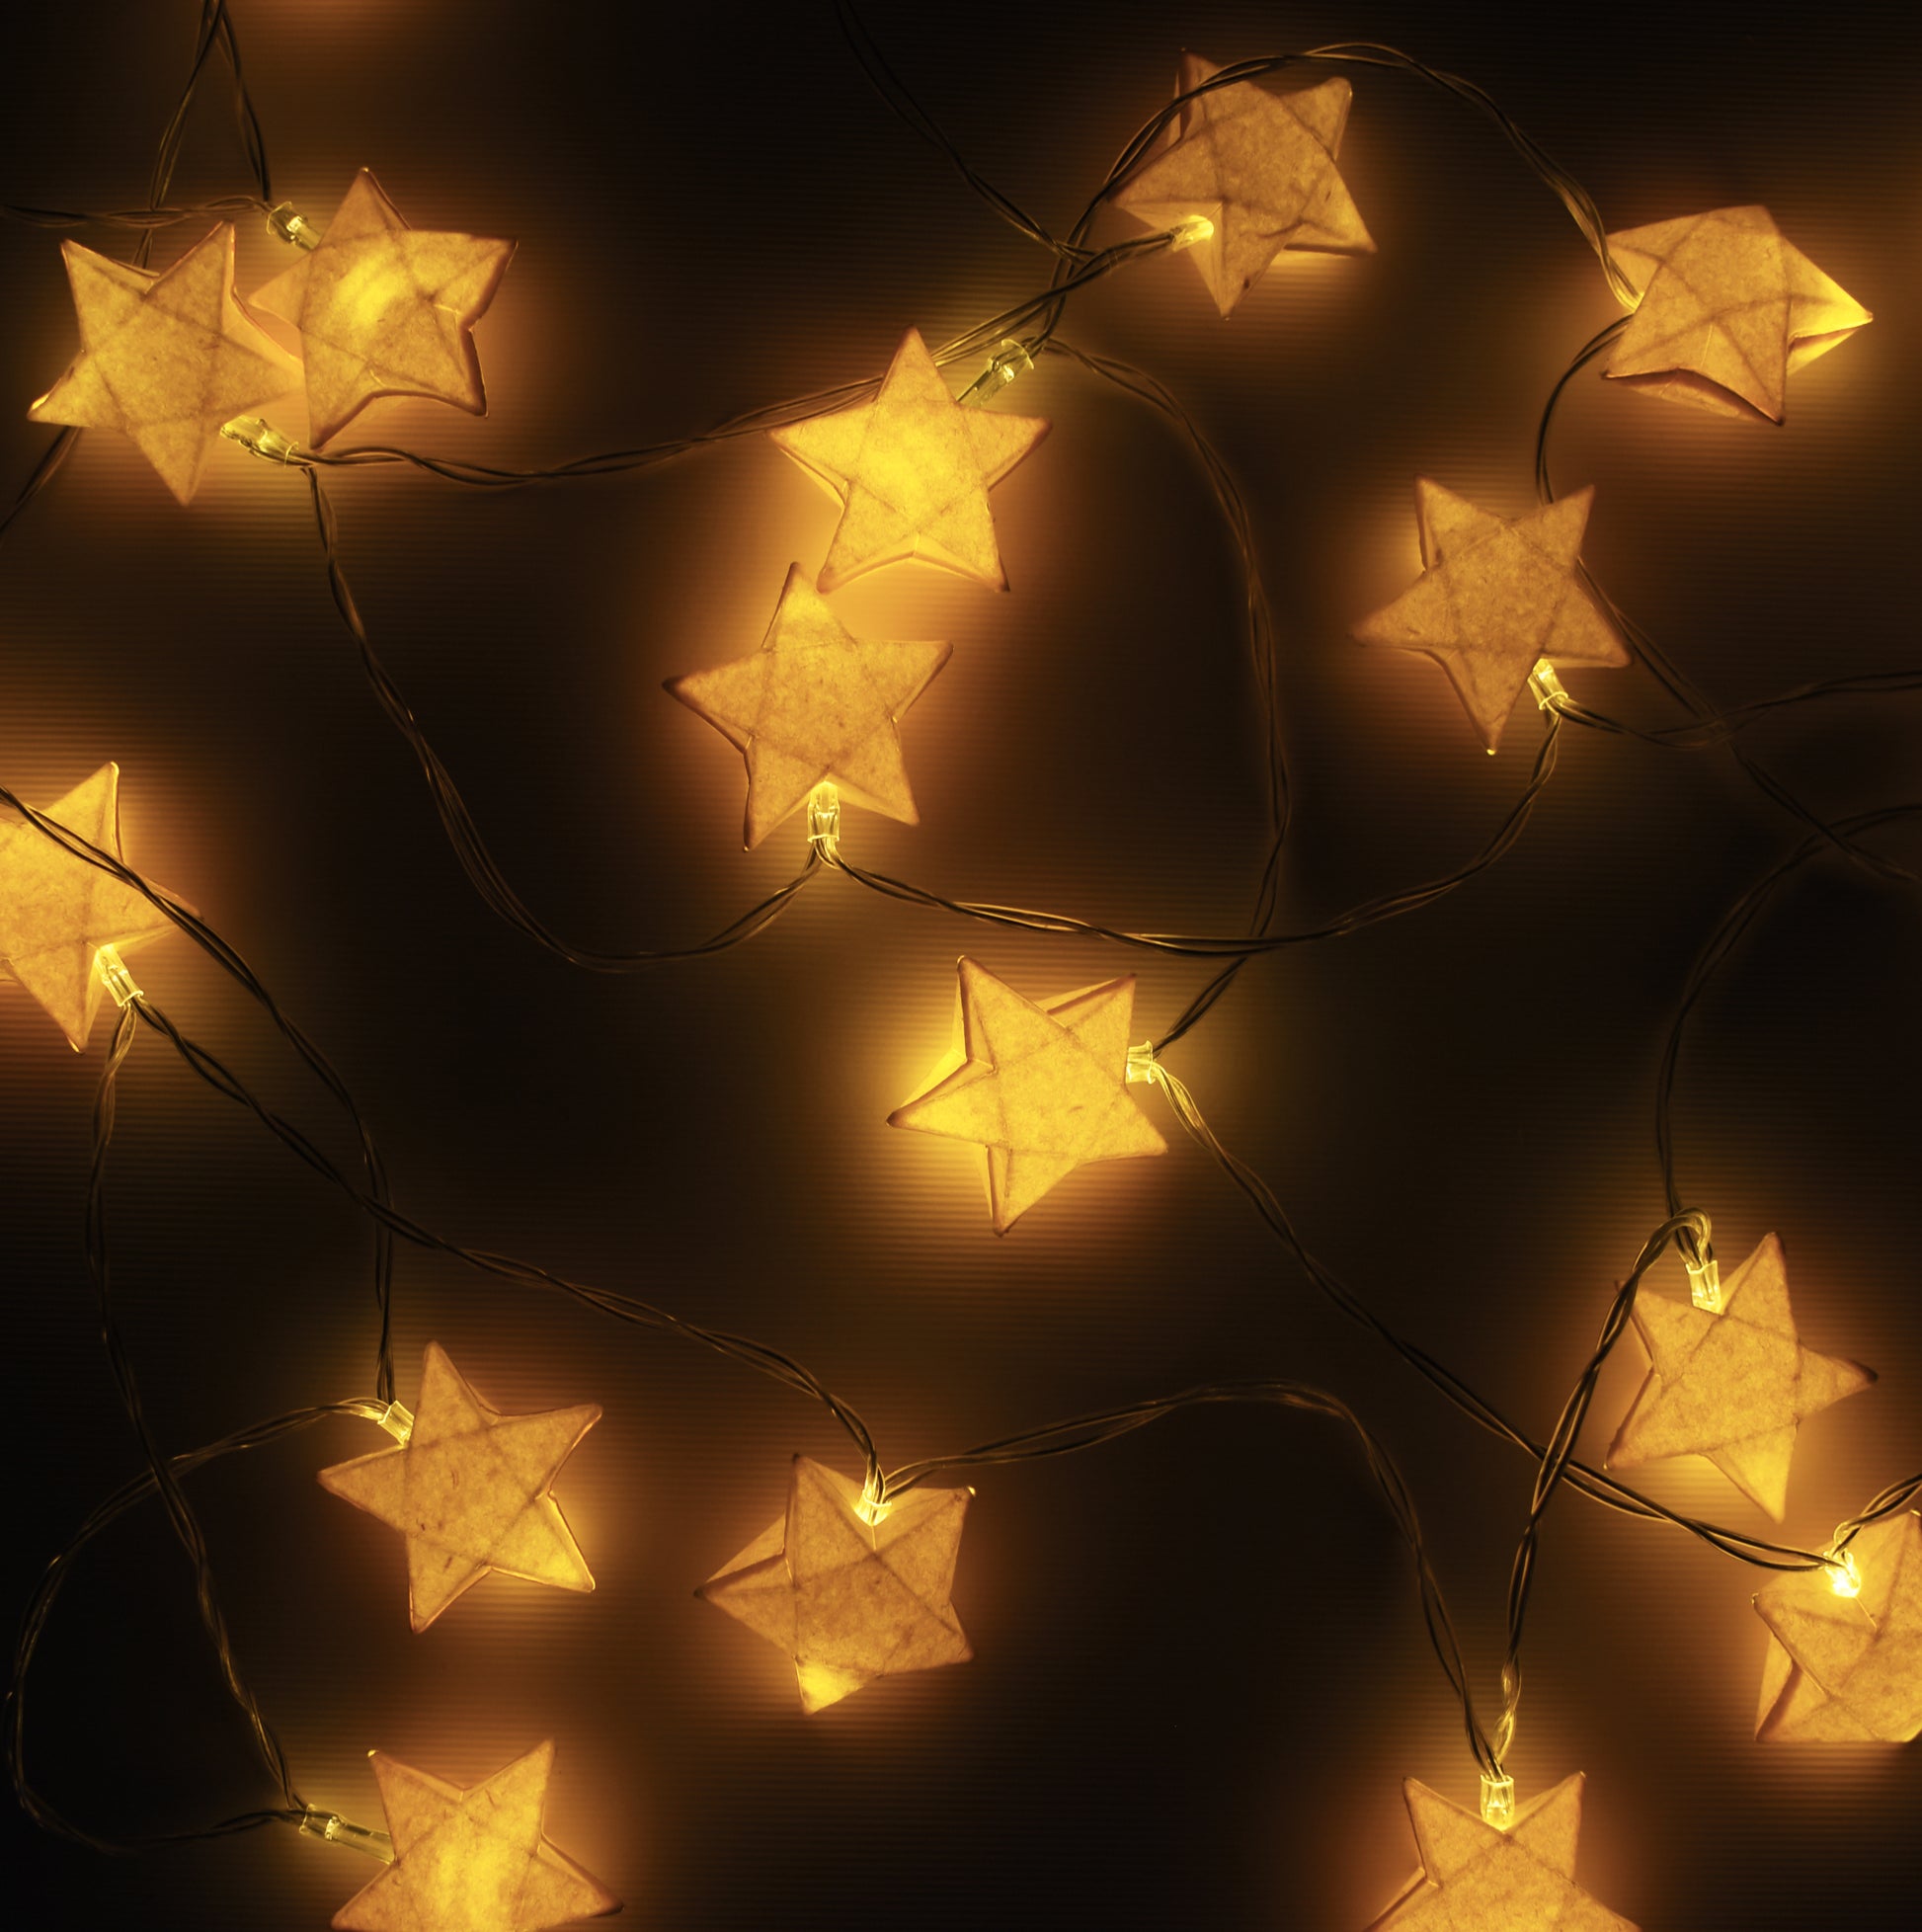 Beautiful Star Fairy Lights best designer must have lights for home decor